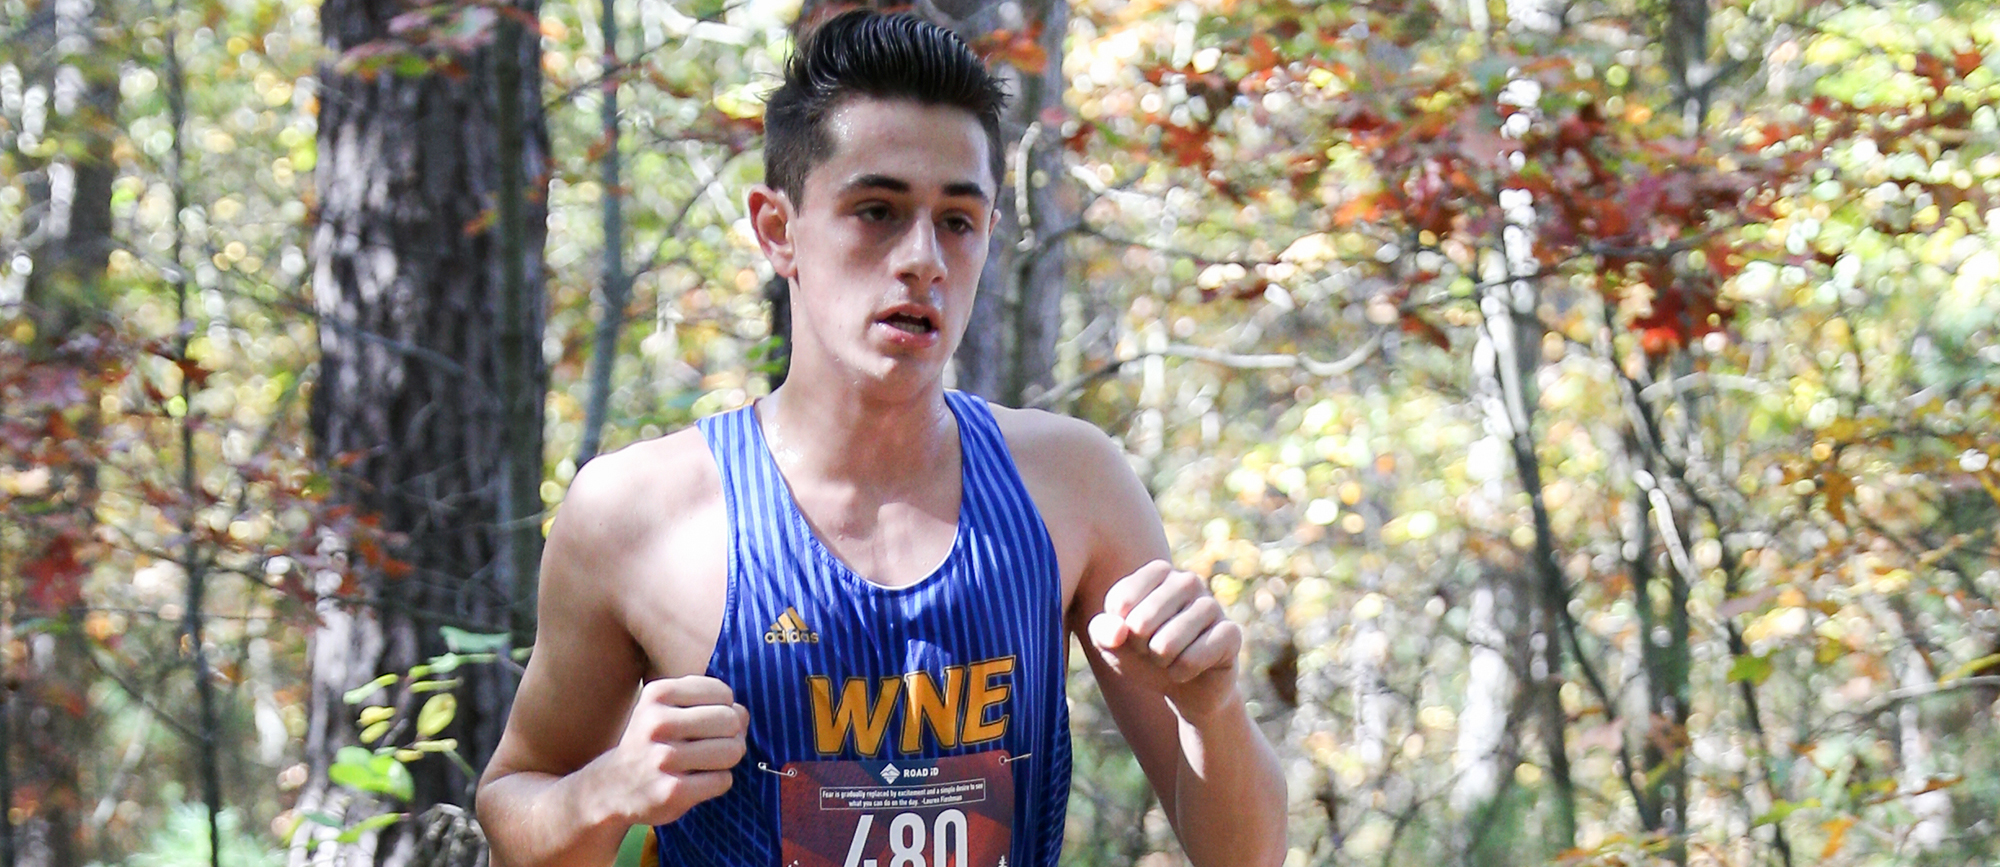 Anthony Spooner was Western New England's top performer at the CCC Championship on Saturday with his 25th place finish in 27:40.36. (Photo by Chris Marion)